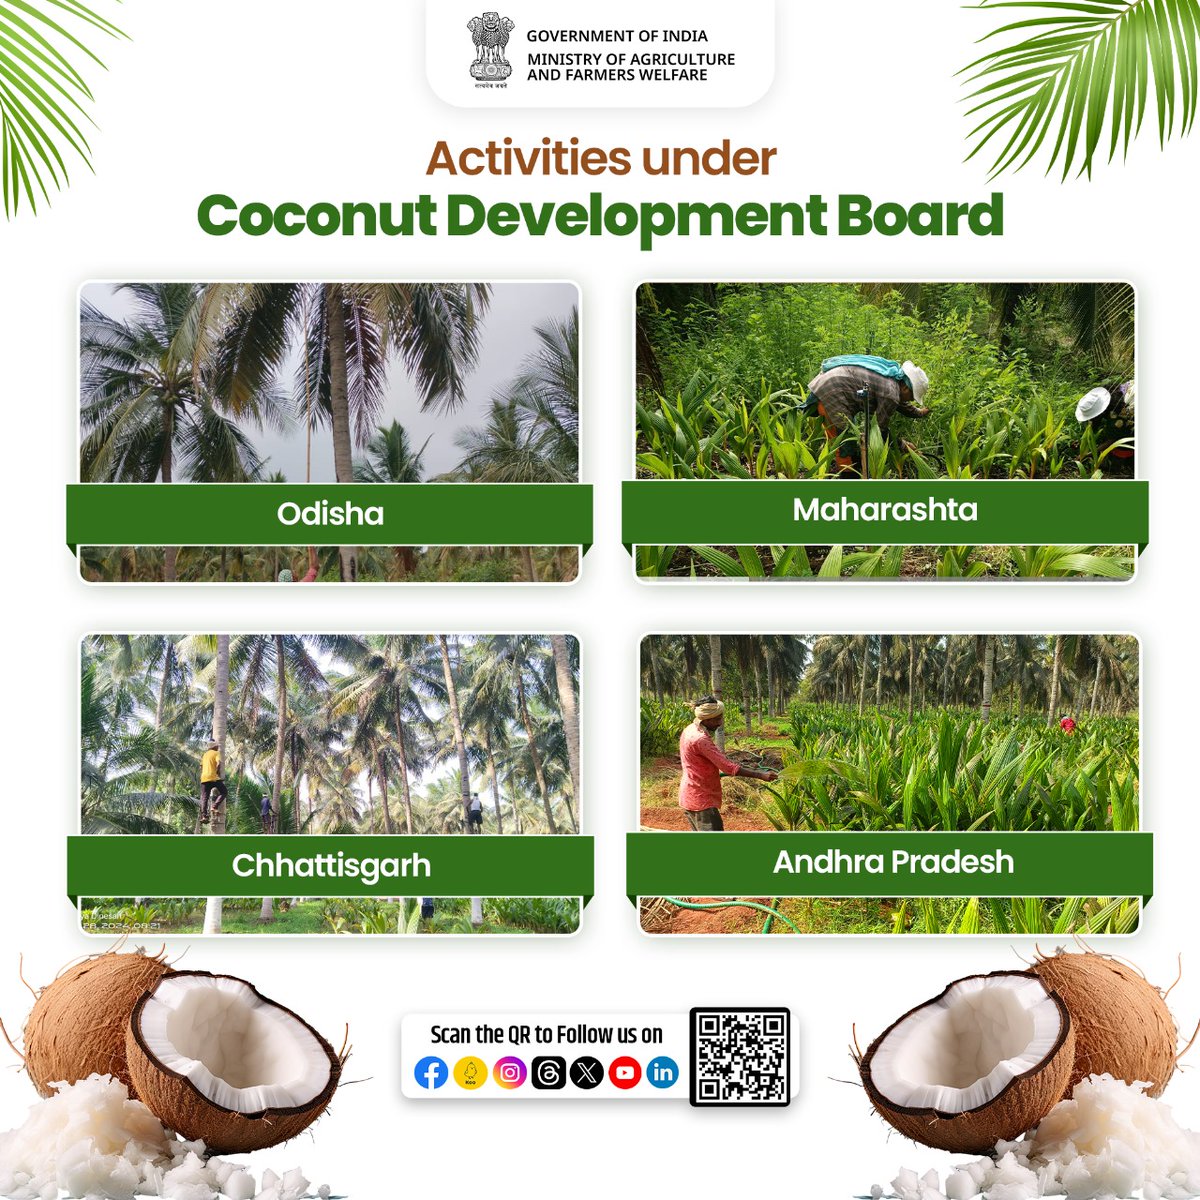 The Coconut Development Board undertook various farm activities & events such as weeding, ploughing, irrigation etc. during the second fortnight of May 2024 at DSP Farms of Odisha, Maharashtra, Chhattisgarh & Andhra Pradesh. #agrigoi #coconut #farm #training #agriculture